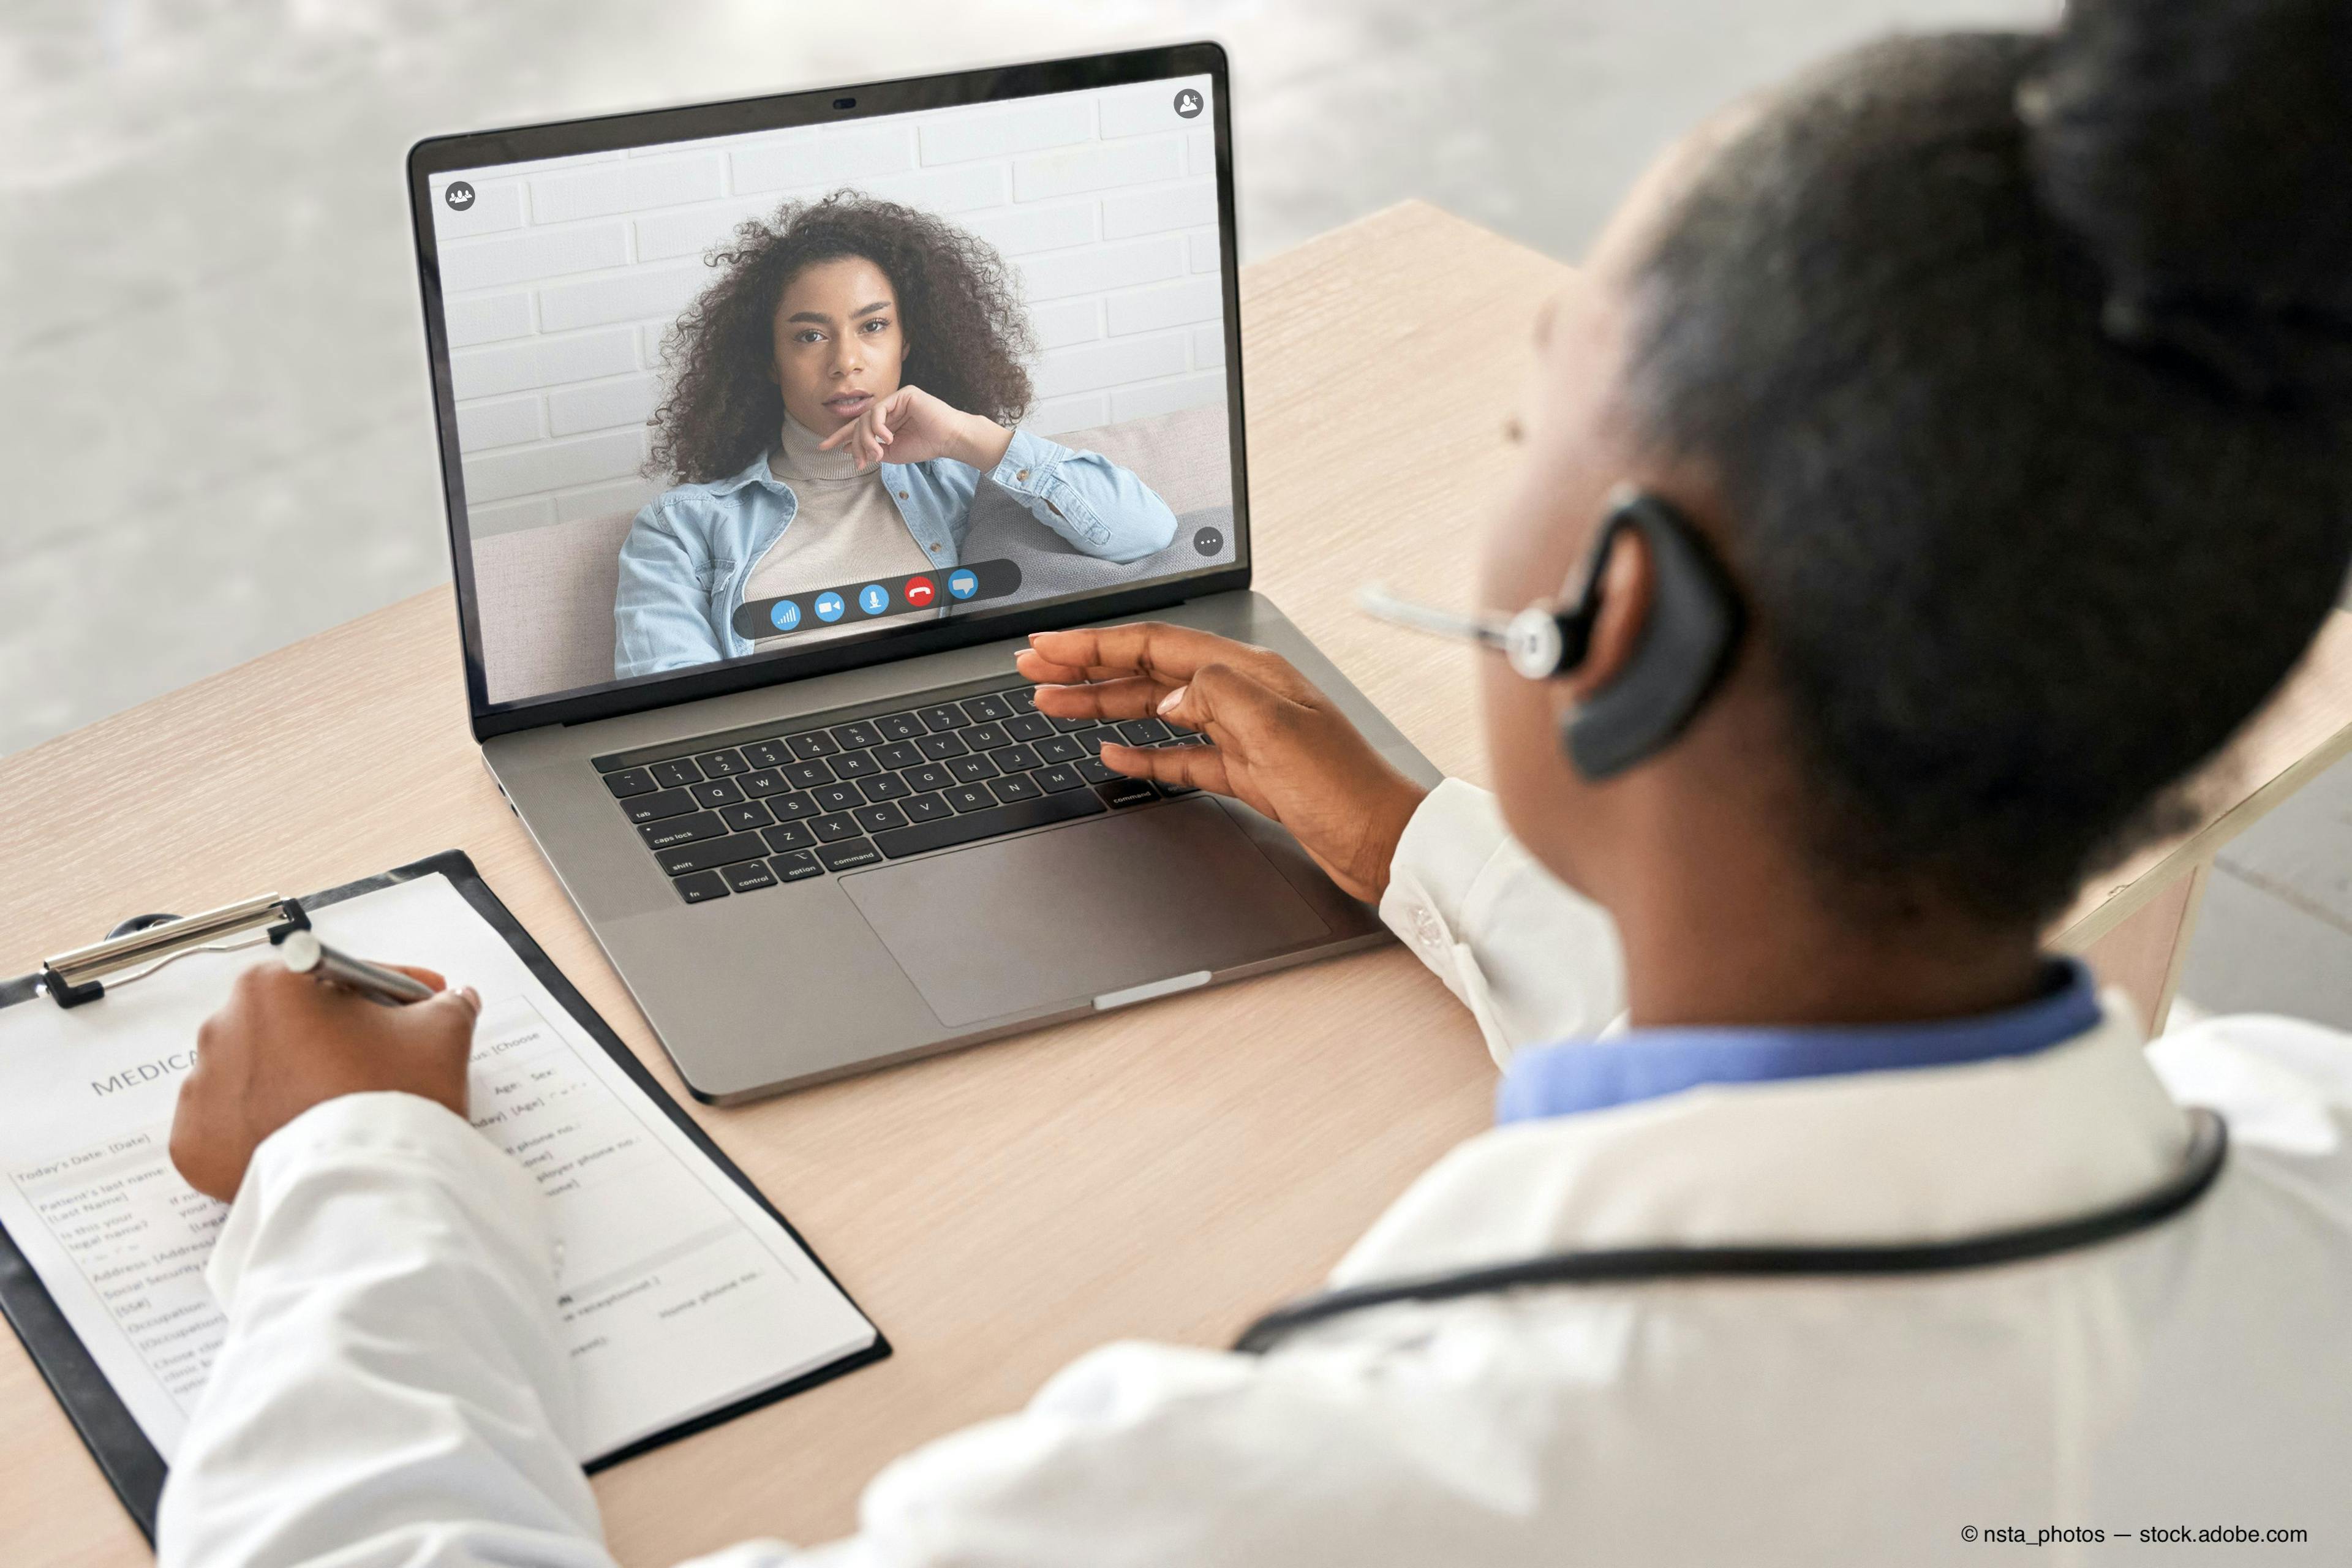 Pearls to educate patients about ocular telemedicine options